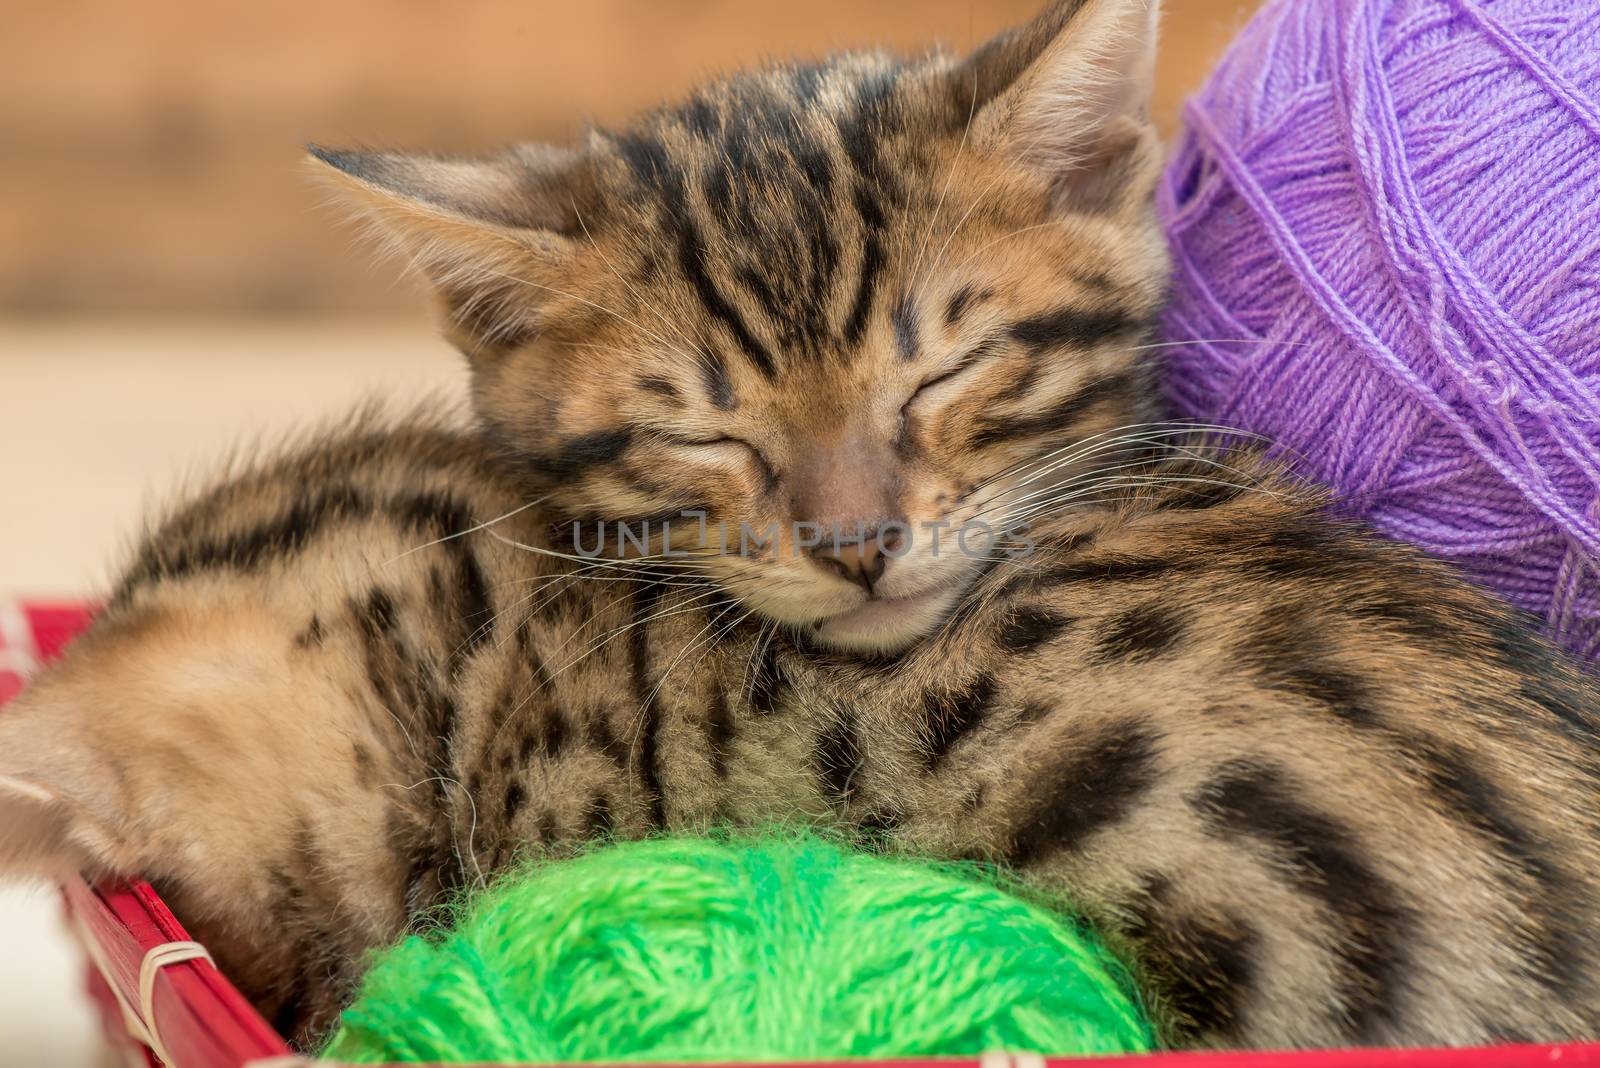 sleeping Bengal kittens with balls of thread close-up portrait by kosmsos111